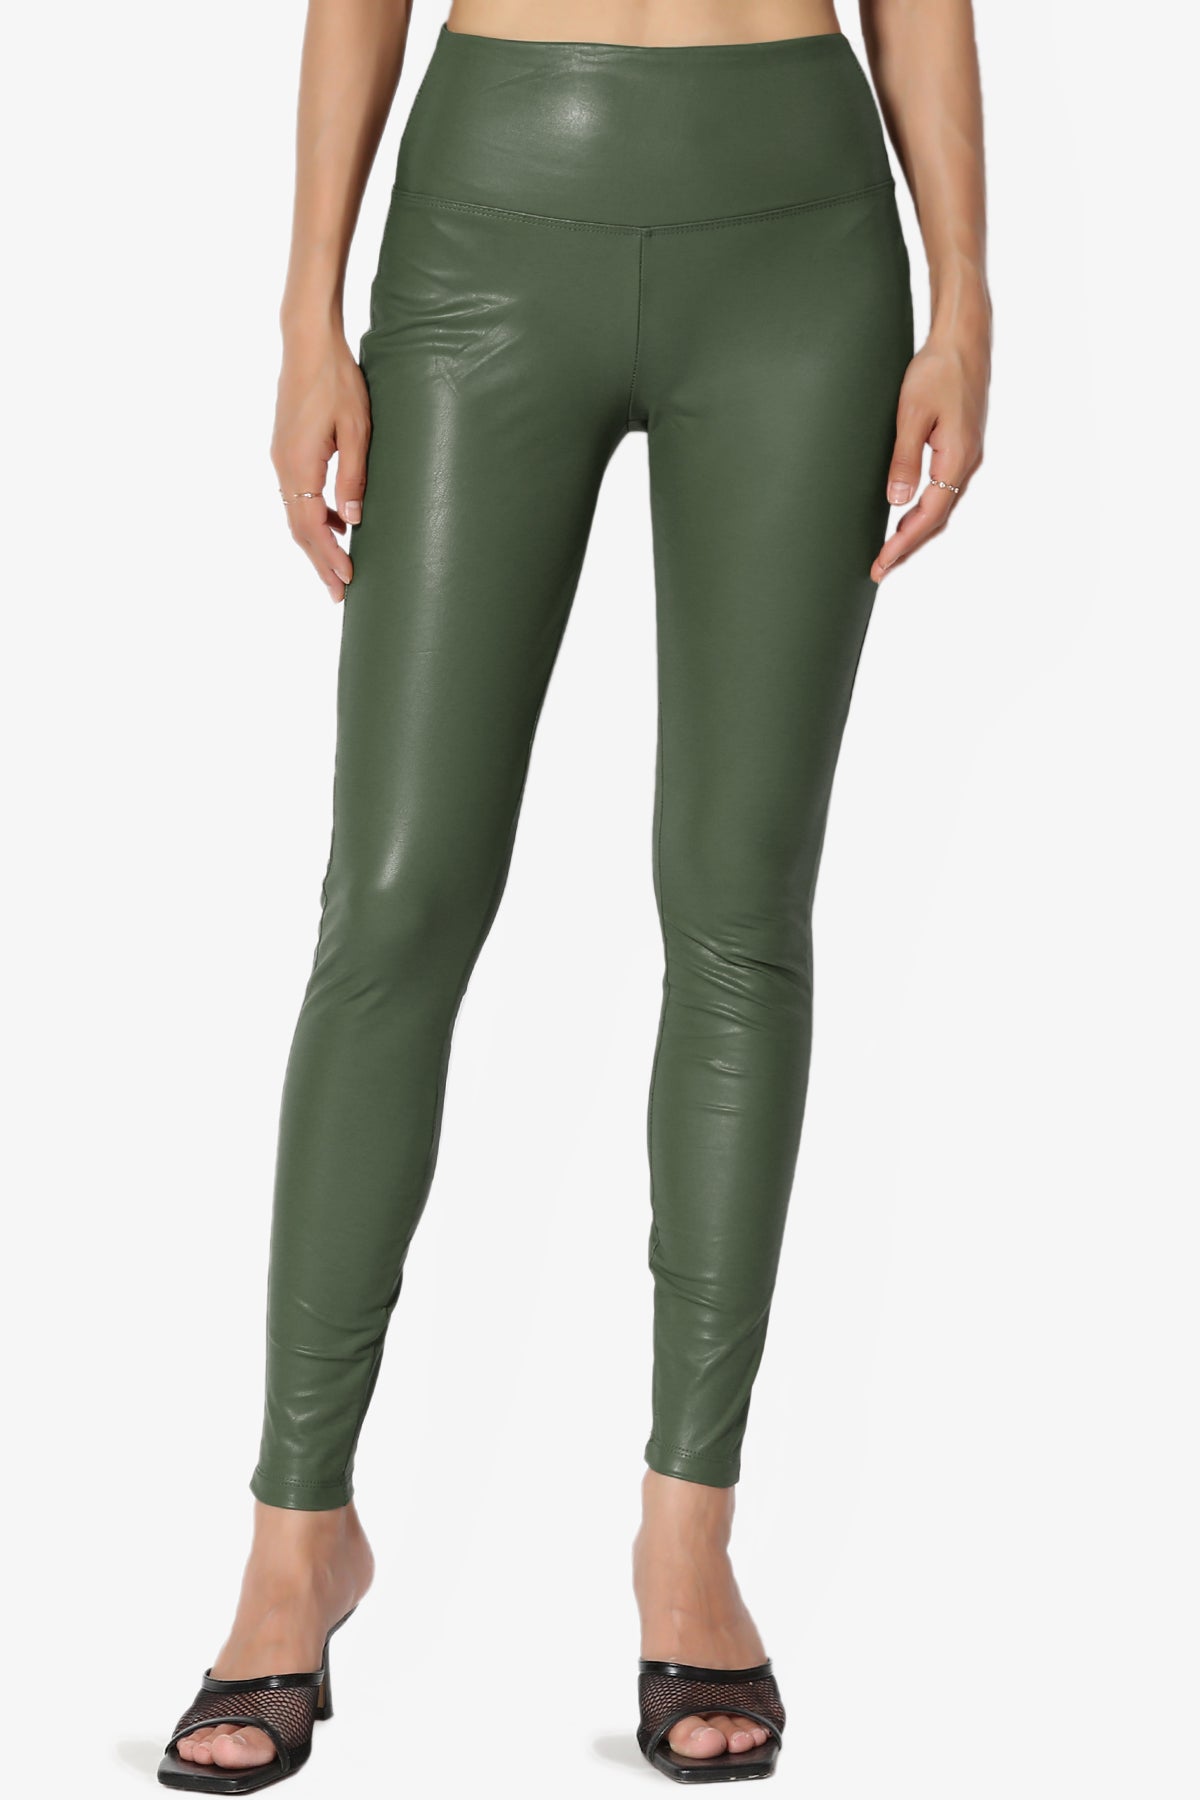 Faux Leather Leggings - Rich Olive - Monkee's of Blowing Rock